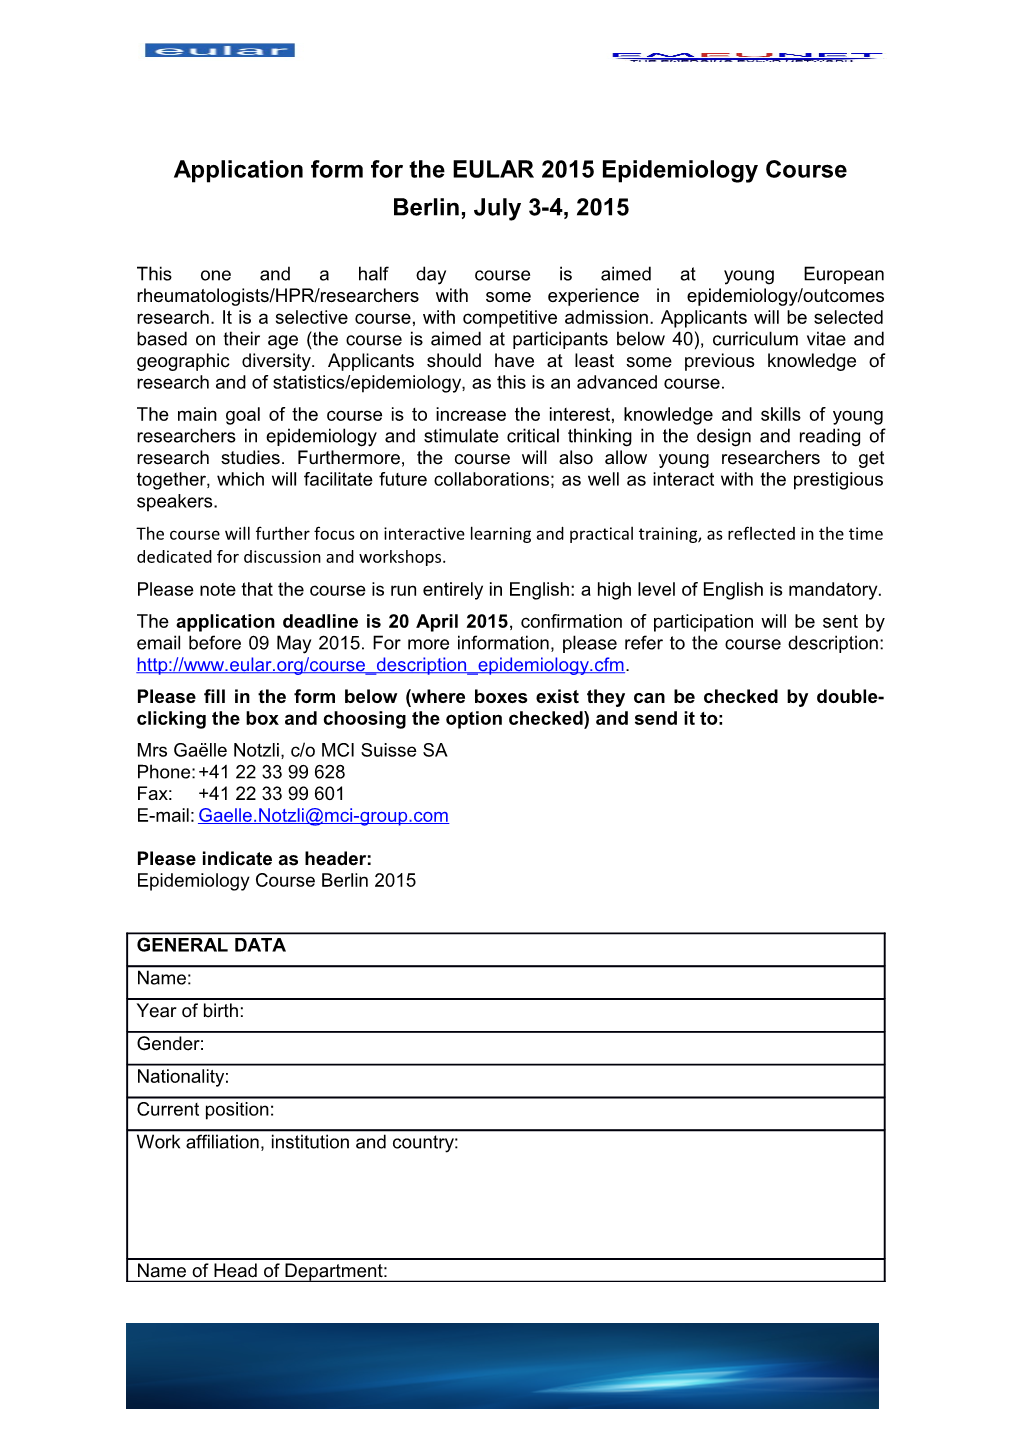 Application Form for the EULAR 2015 Epidemiology Course